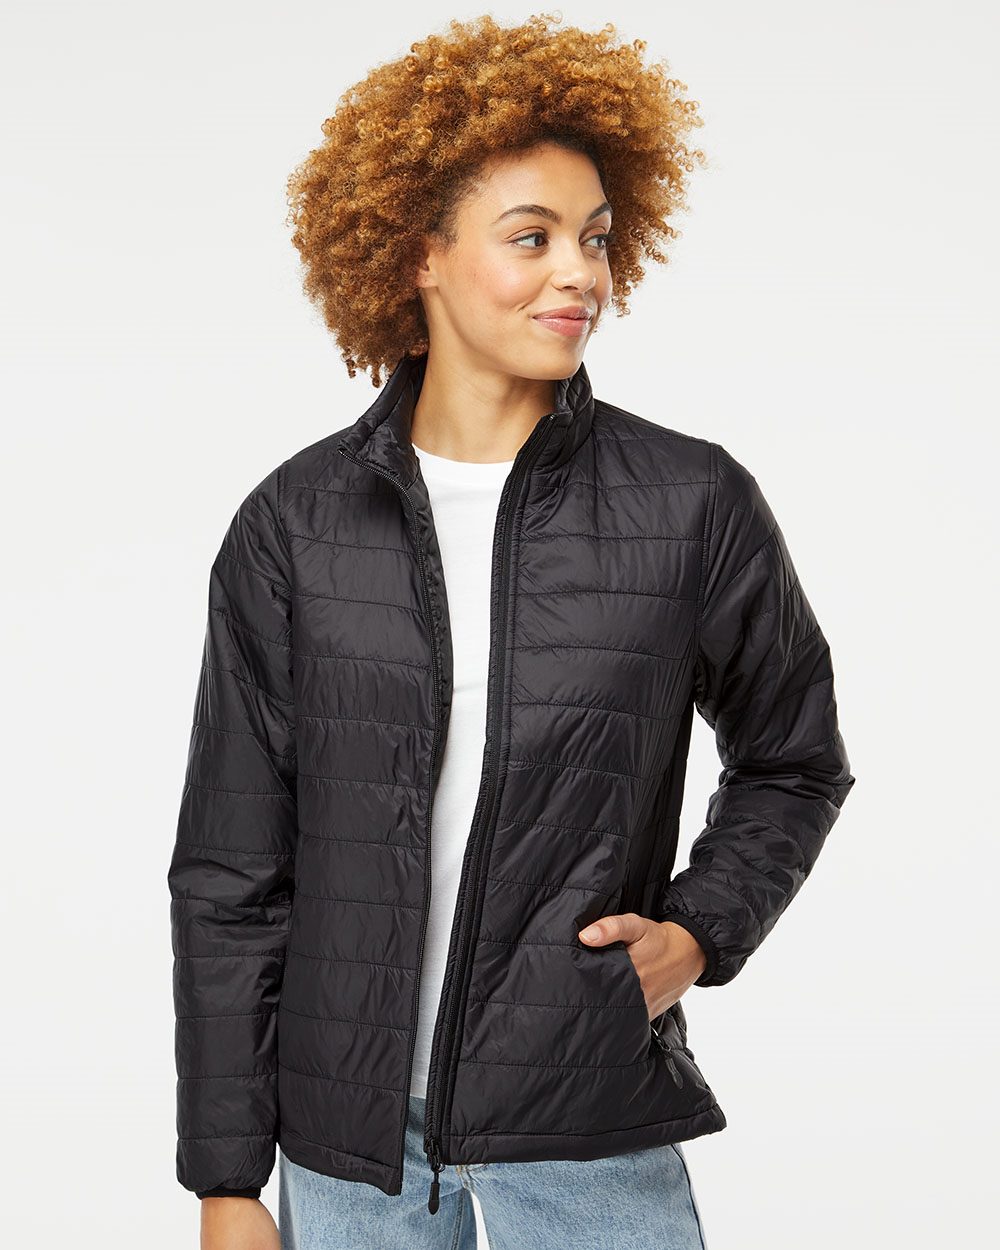 Independent Trading Co. EXP200PFZ - Women's Puffer Jacket